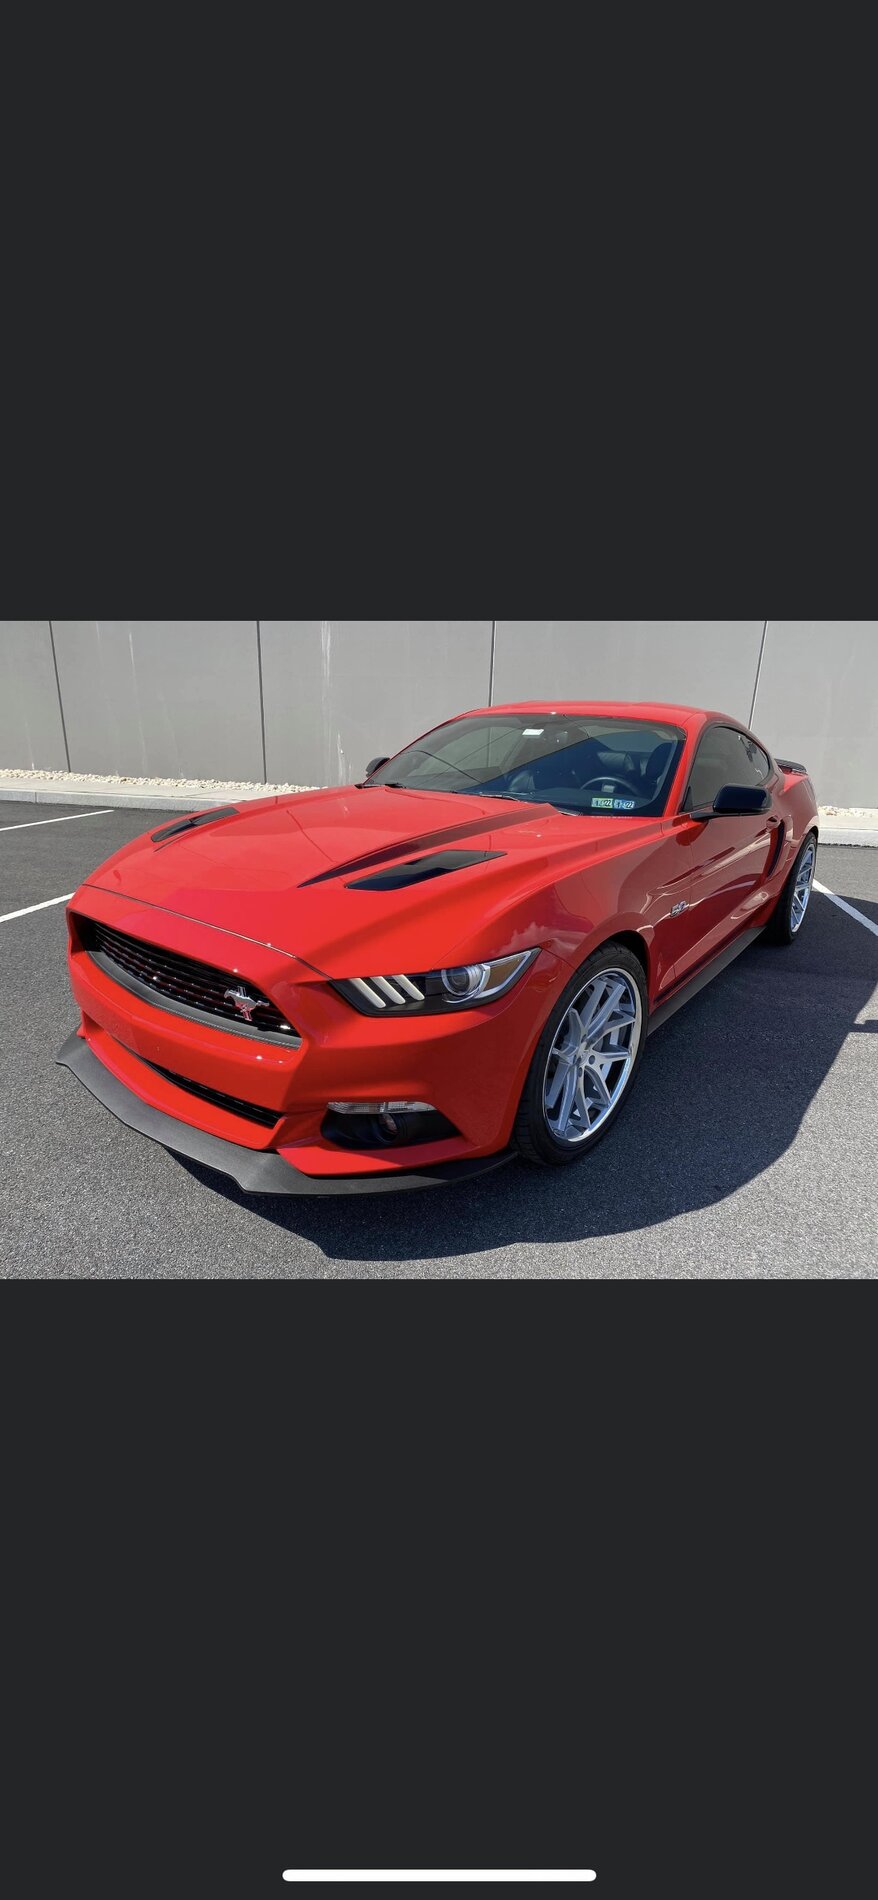 S650 Mustang Introduce Yourself to Mustang7G! 5F58880B-C4F0-4203-9AD9-3E82E0060831